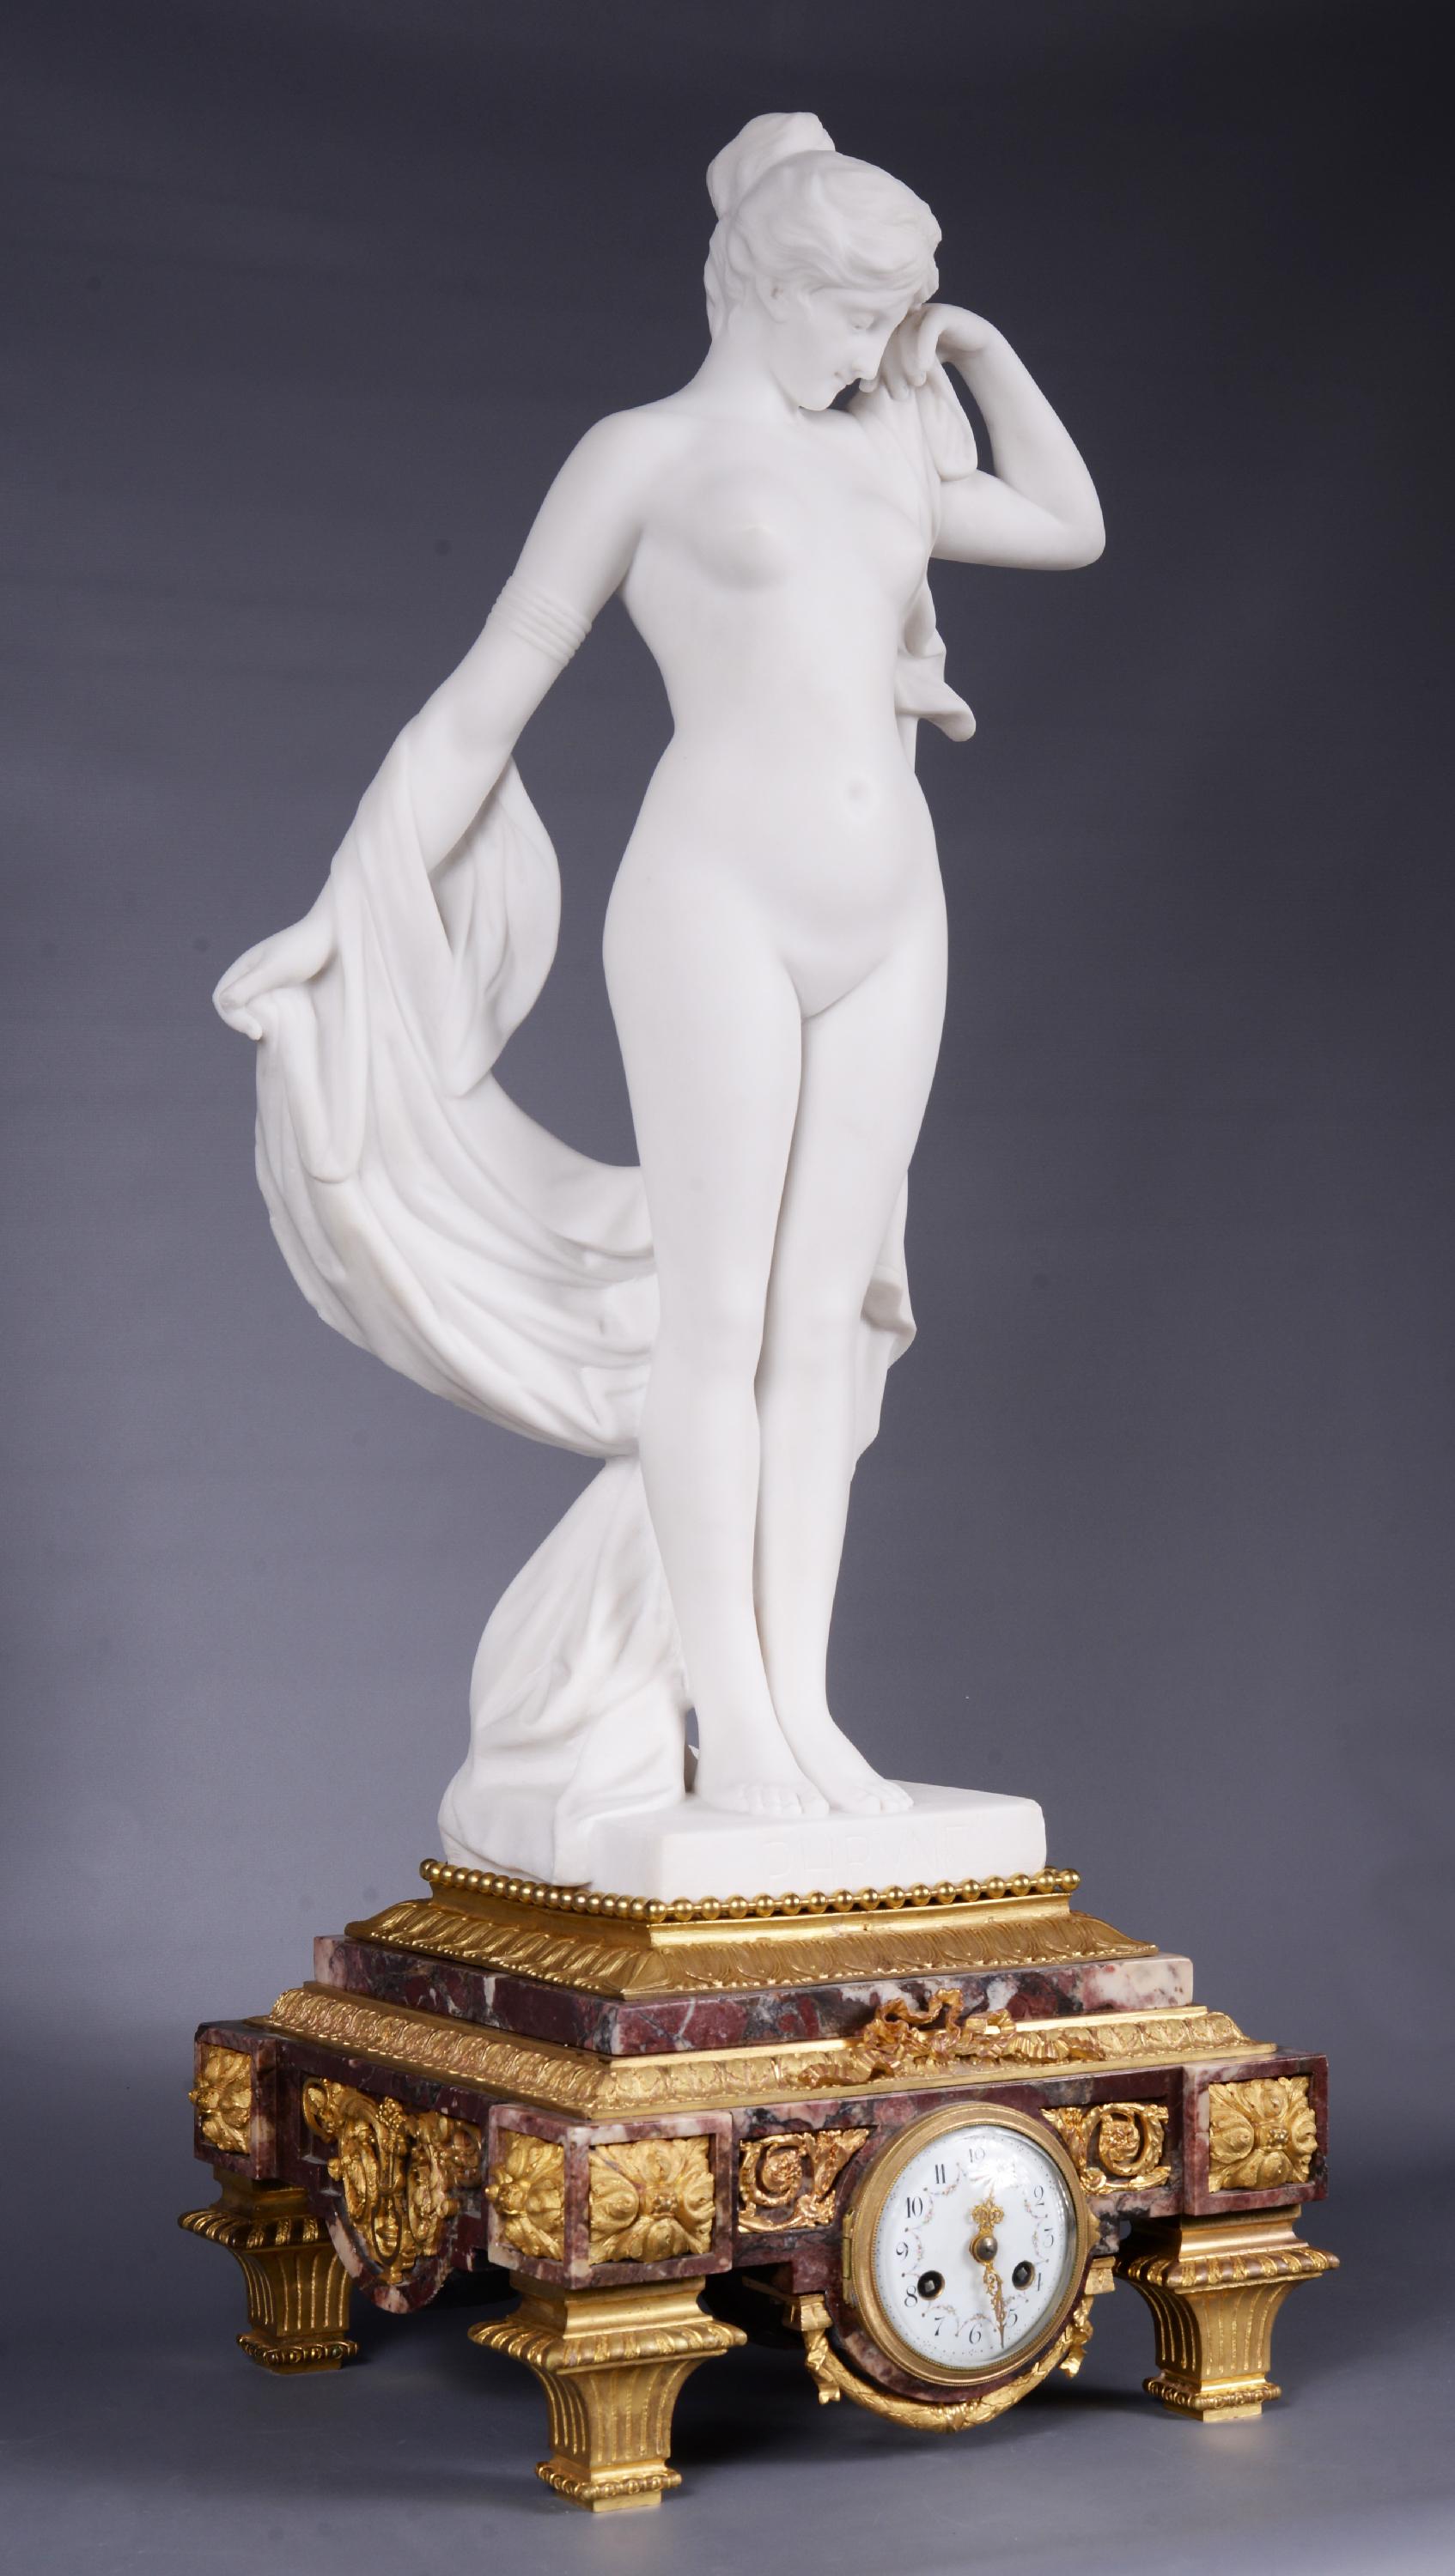 This clock presents a reduced reproduction in statuary white marble of 